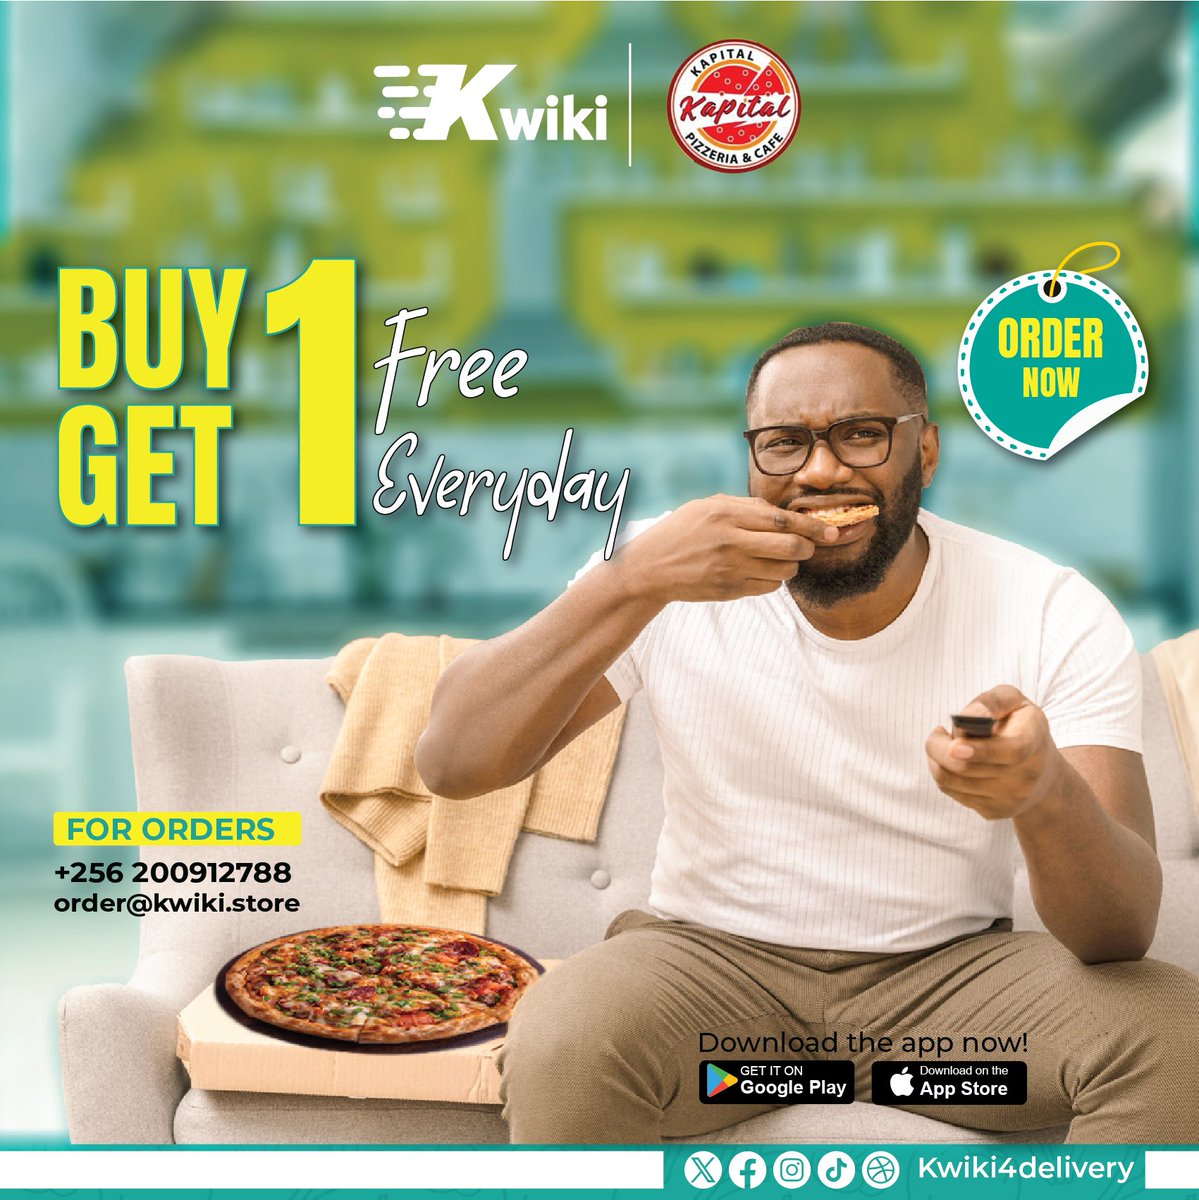 Get double the deliciousness! Kapital Pizzeria has a BOGO (Buy One Get One Free) deal every single day.

#kwiki4delivery #kwikidelivery #kwiki #fooddelivery #fastdelivery #delivery #pizza #buyonegetonefree #doitquickwithkwiki #alwaysontime #fypシ #fyp #fy #foryou #foryoupage